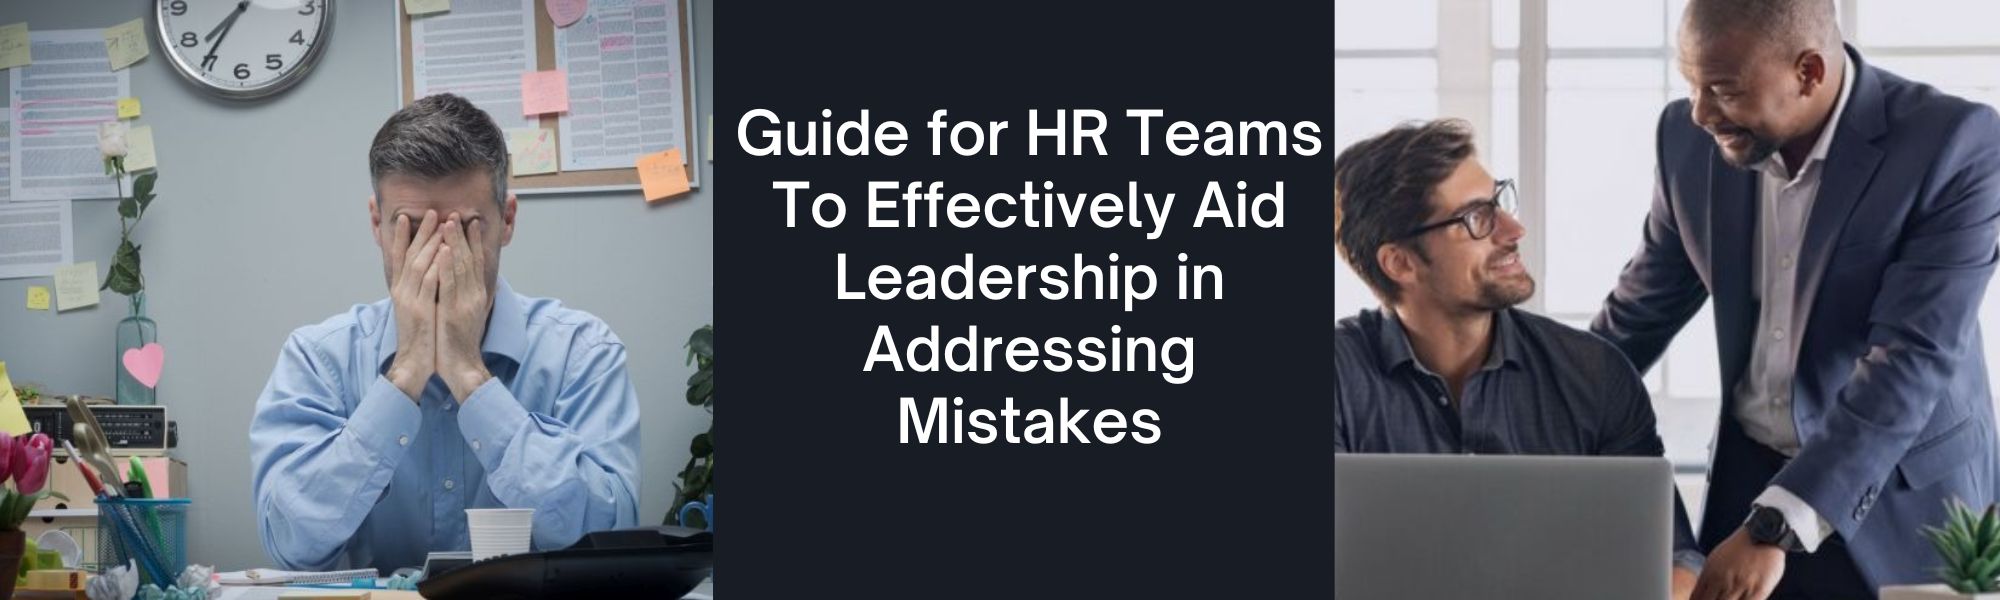 Guide for HR Teams To Effectively Aid Leadership in Addressing Mistakes